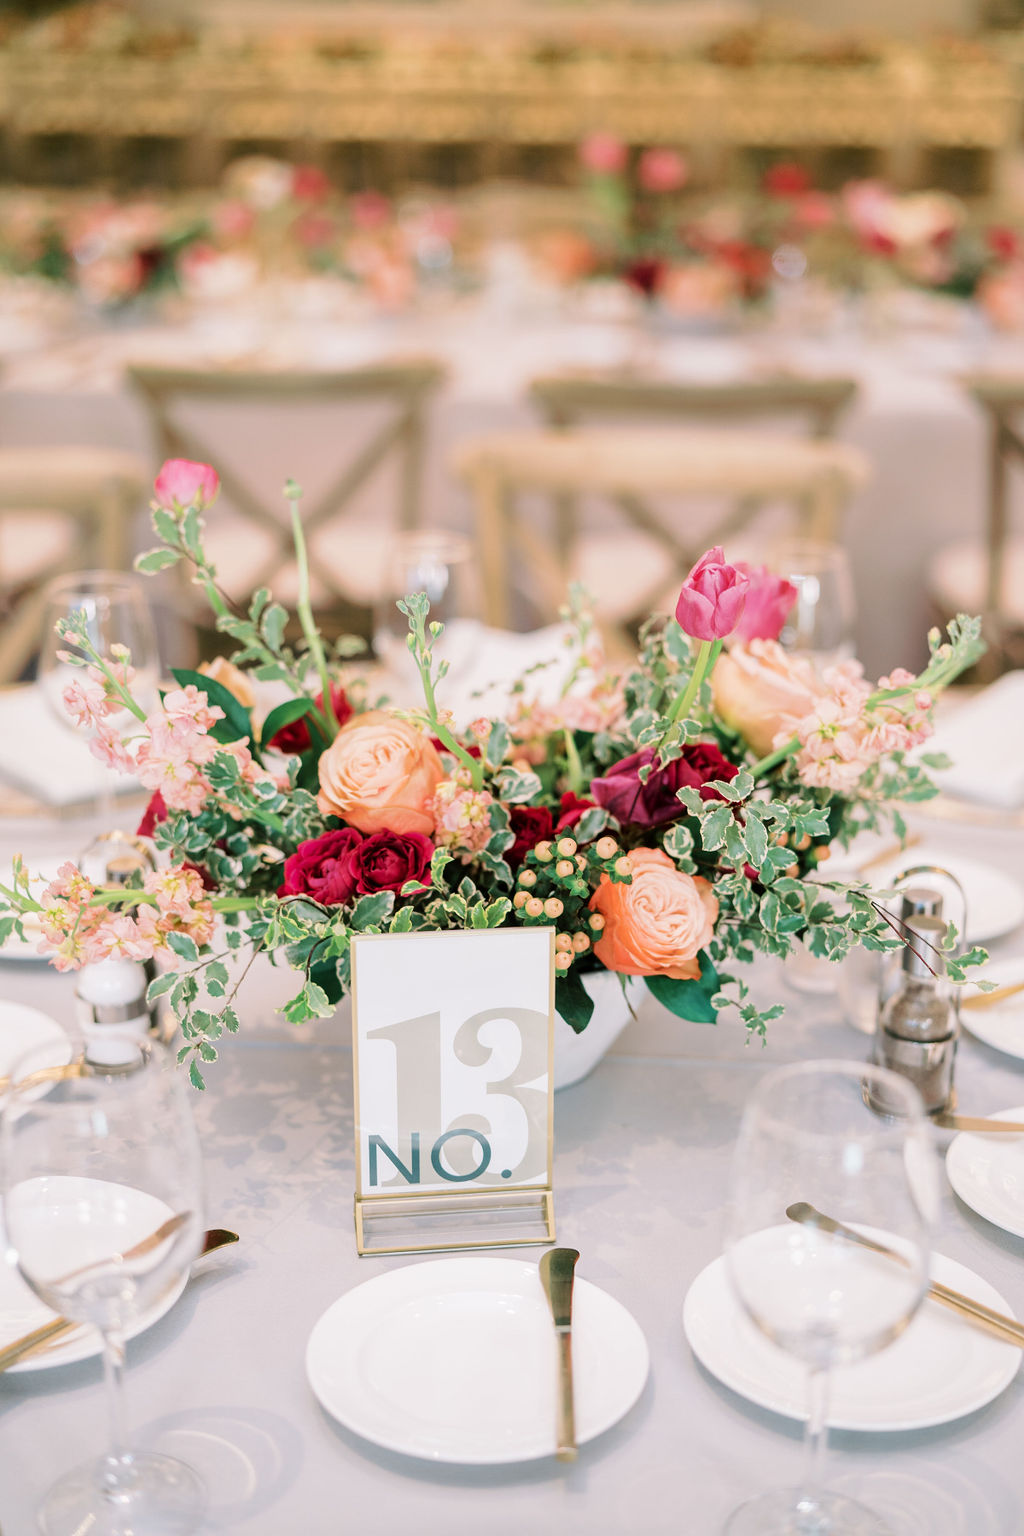 Reception centerpiece in white vase of pink and peach flowers.